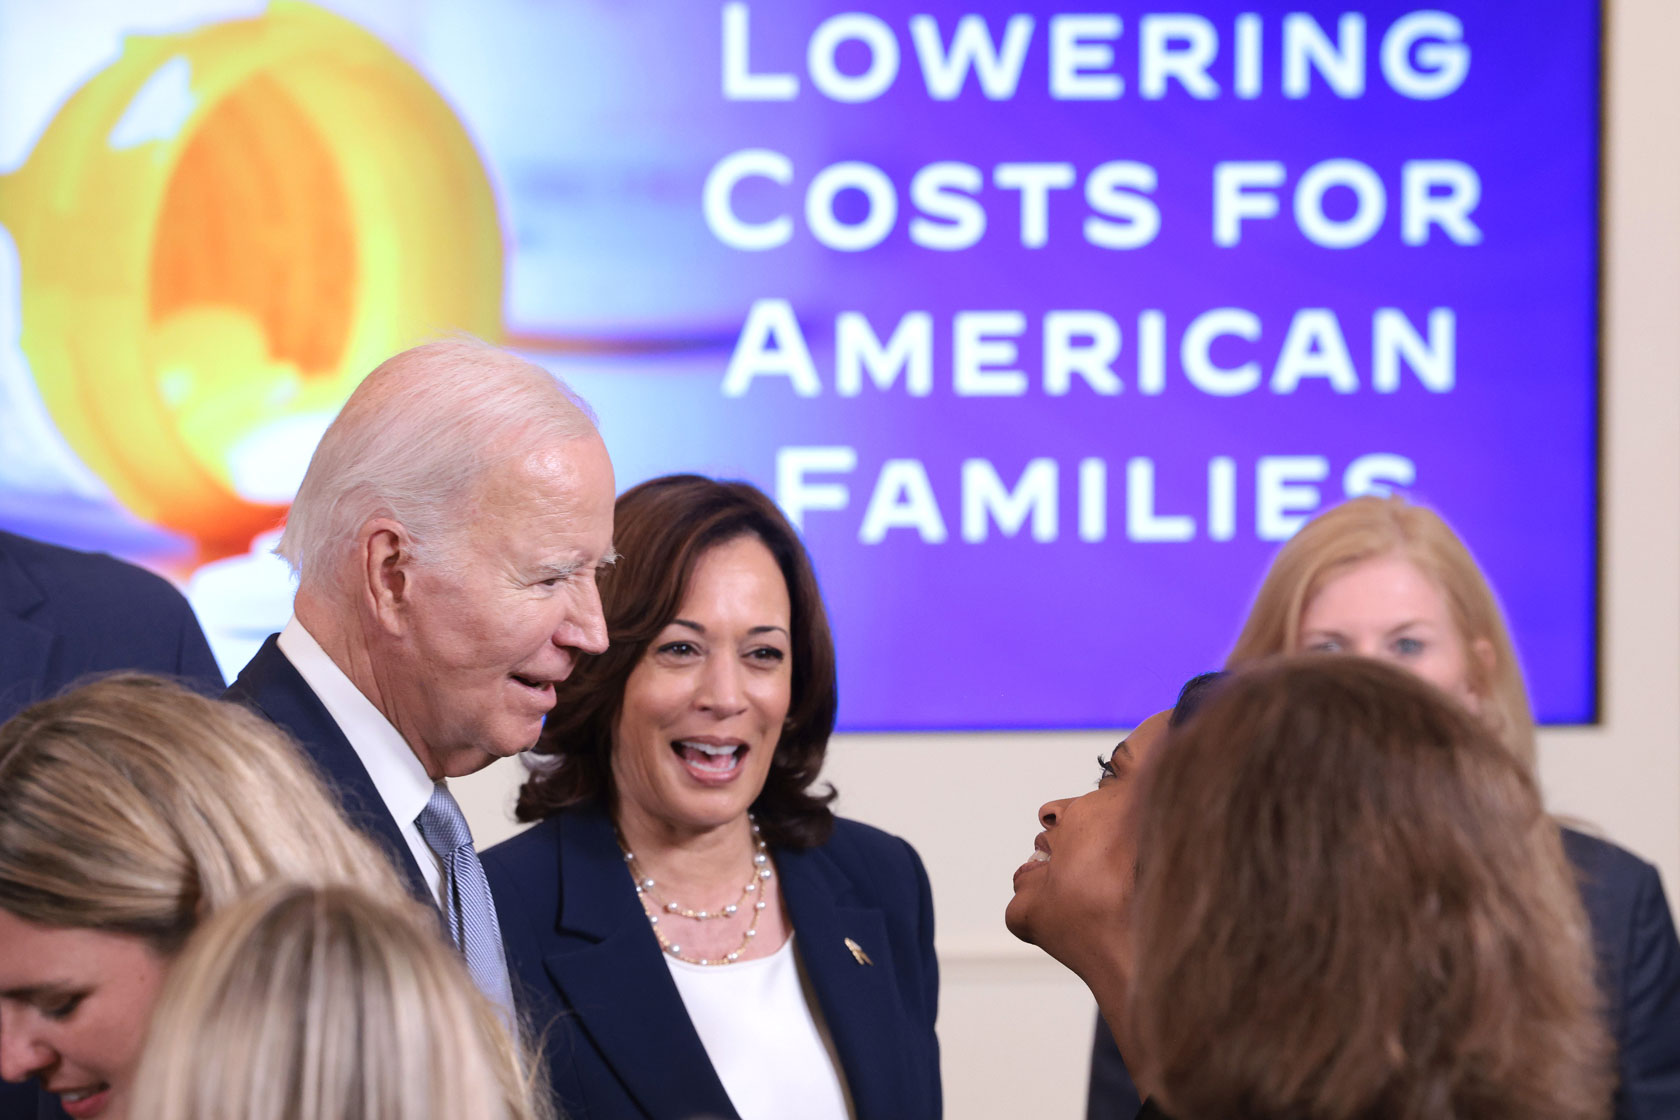 U.S. President Joe Biden and Vice President Kamala Harris greet audience members during an event promoting lower health care costs.